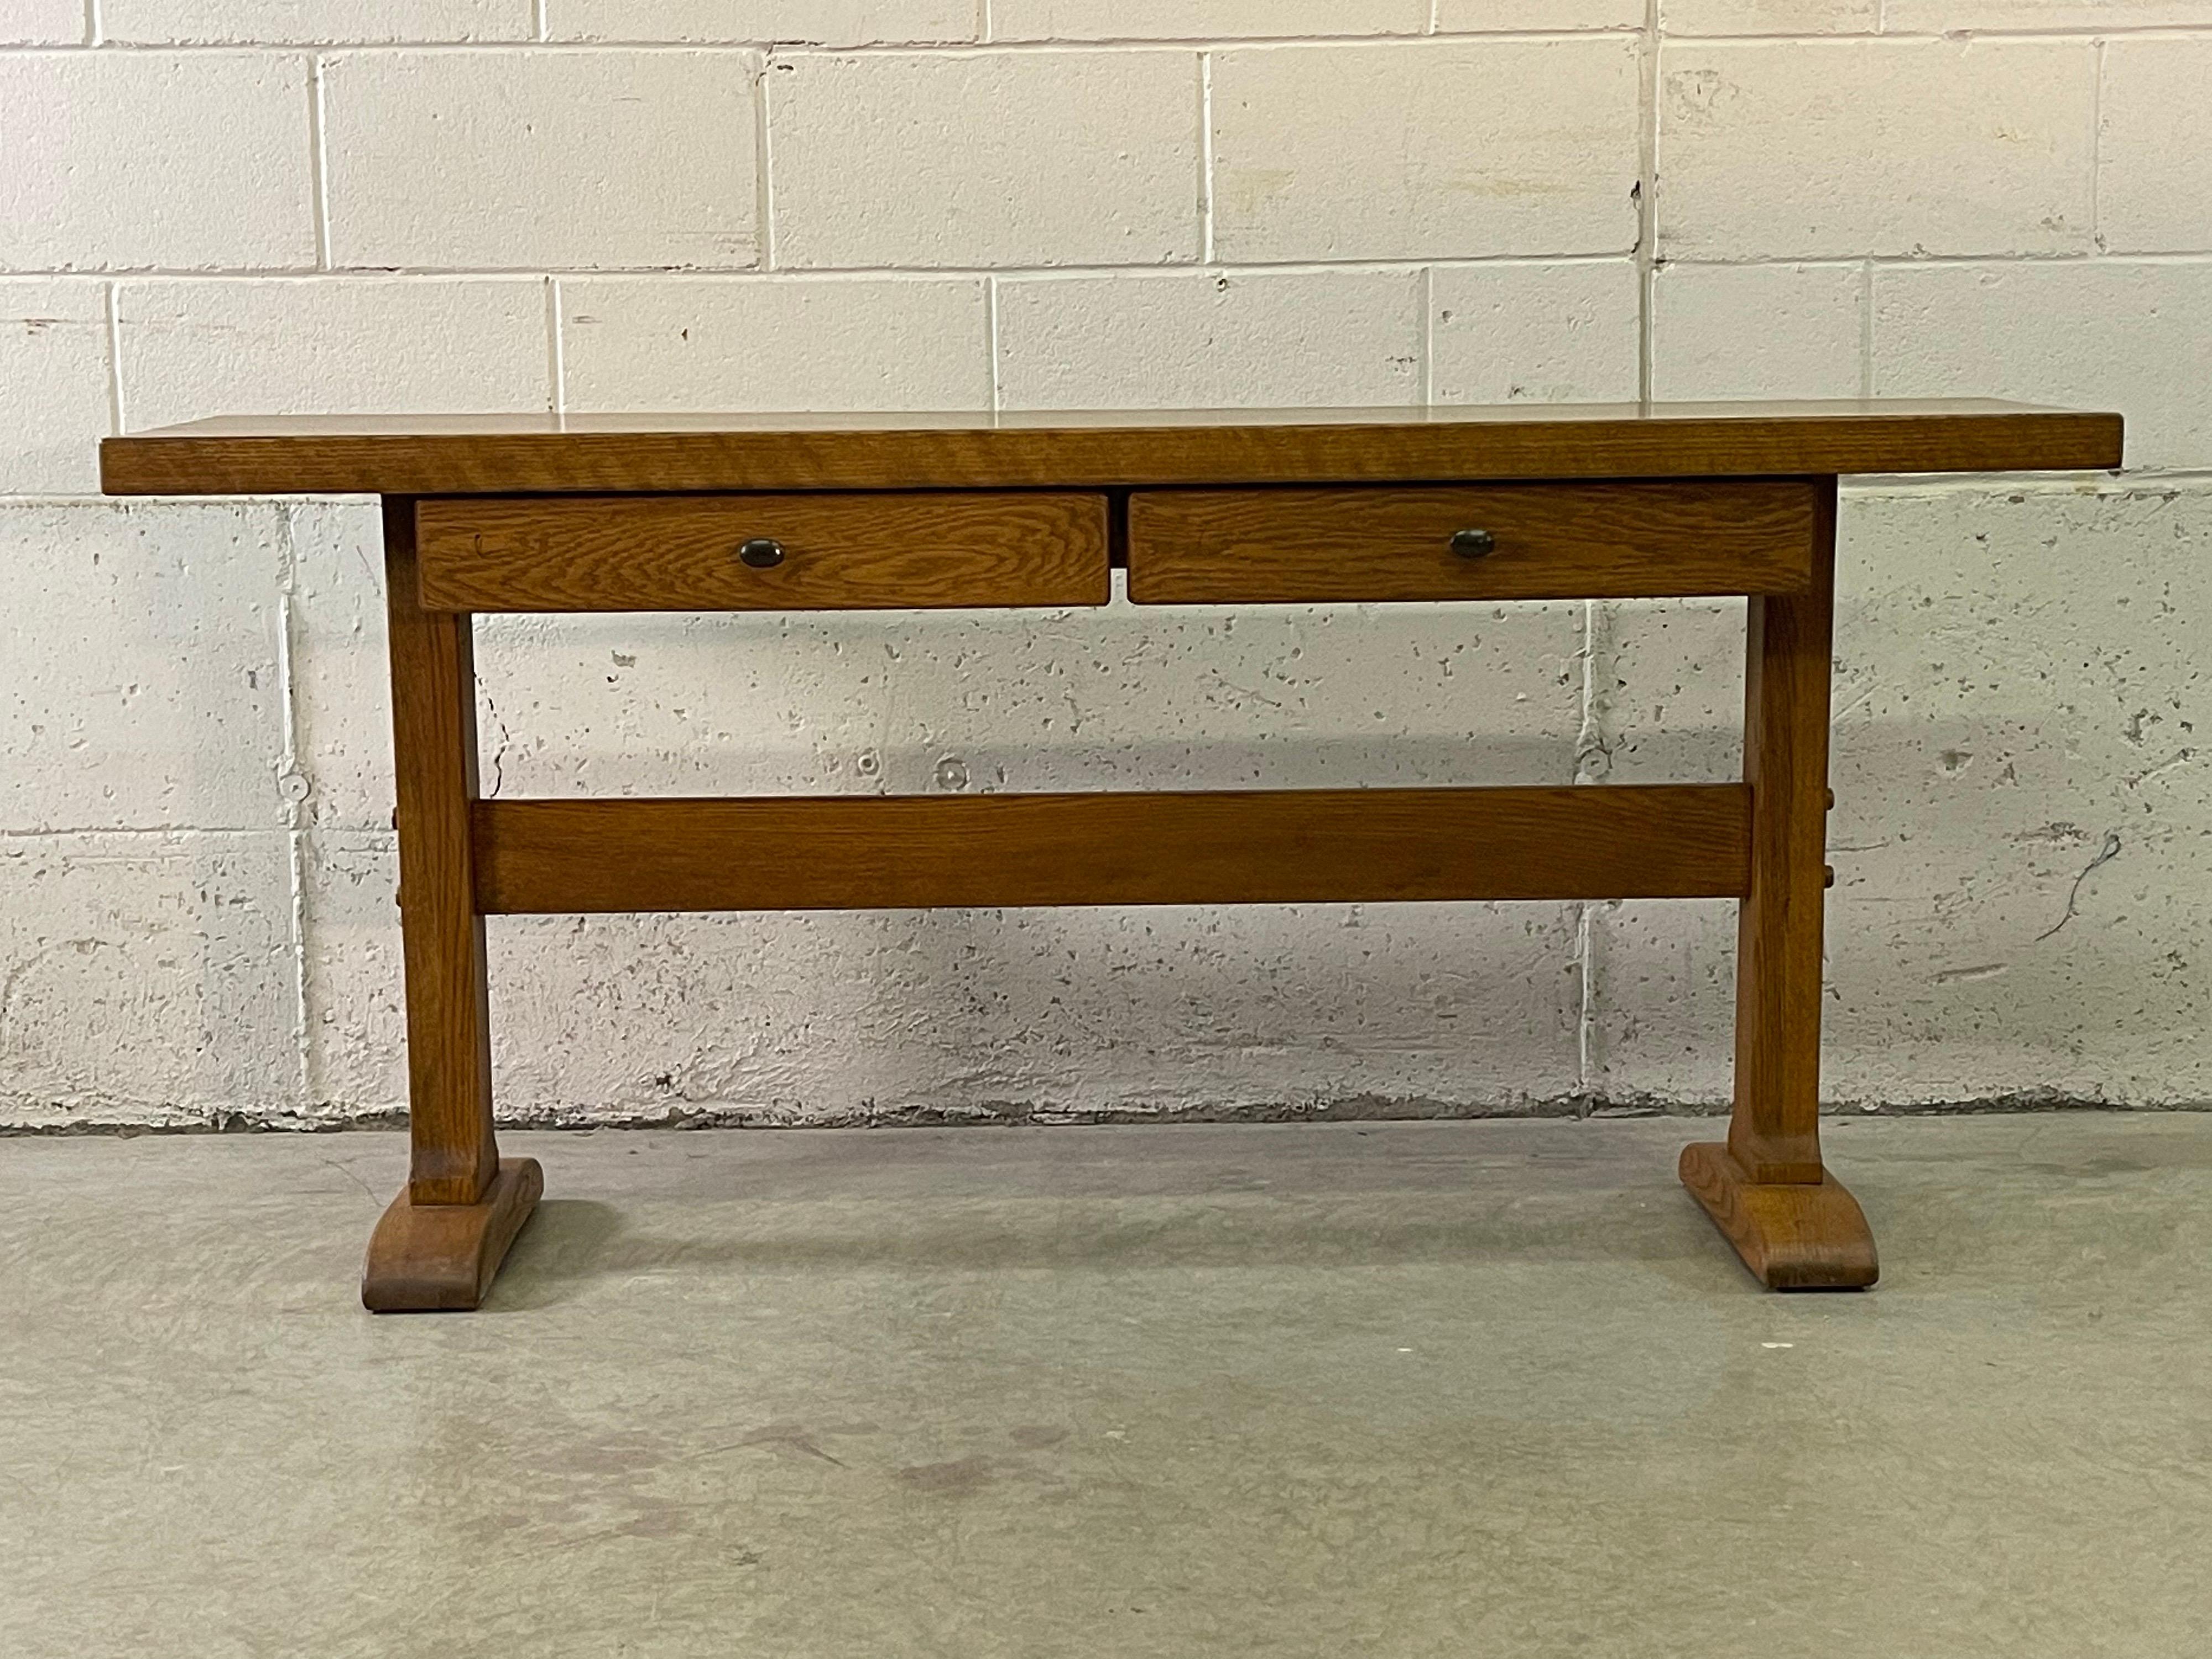 Vintage 1980s Conant Ball console table with two drawers for storage. The table is a mix of oak and pine wood. Marked.